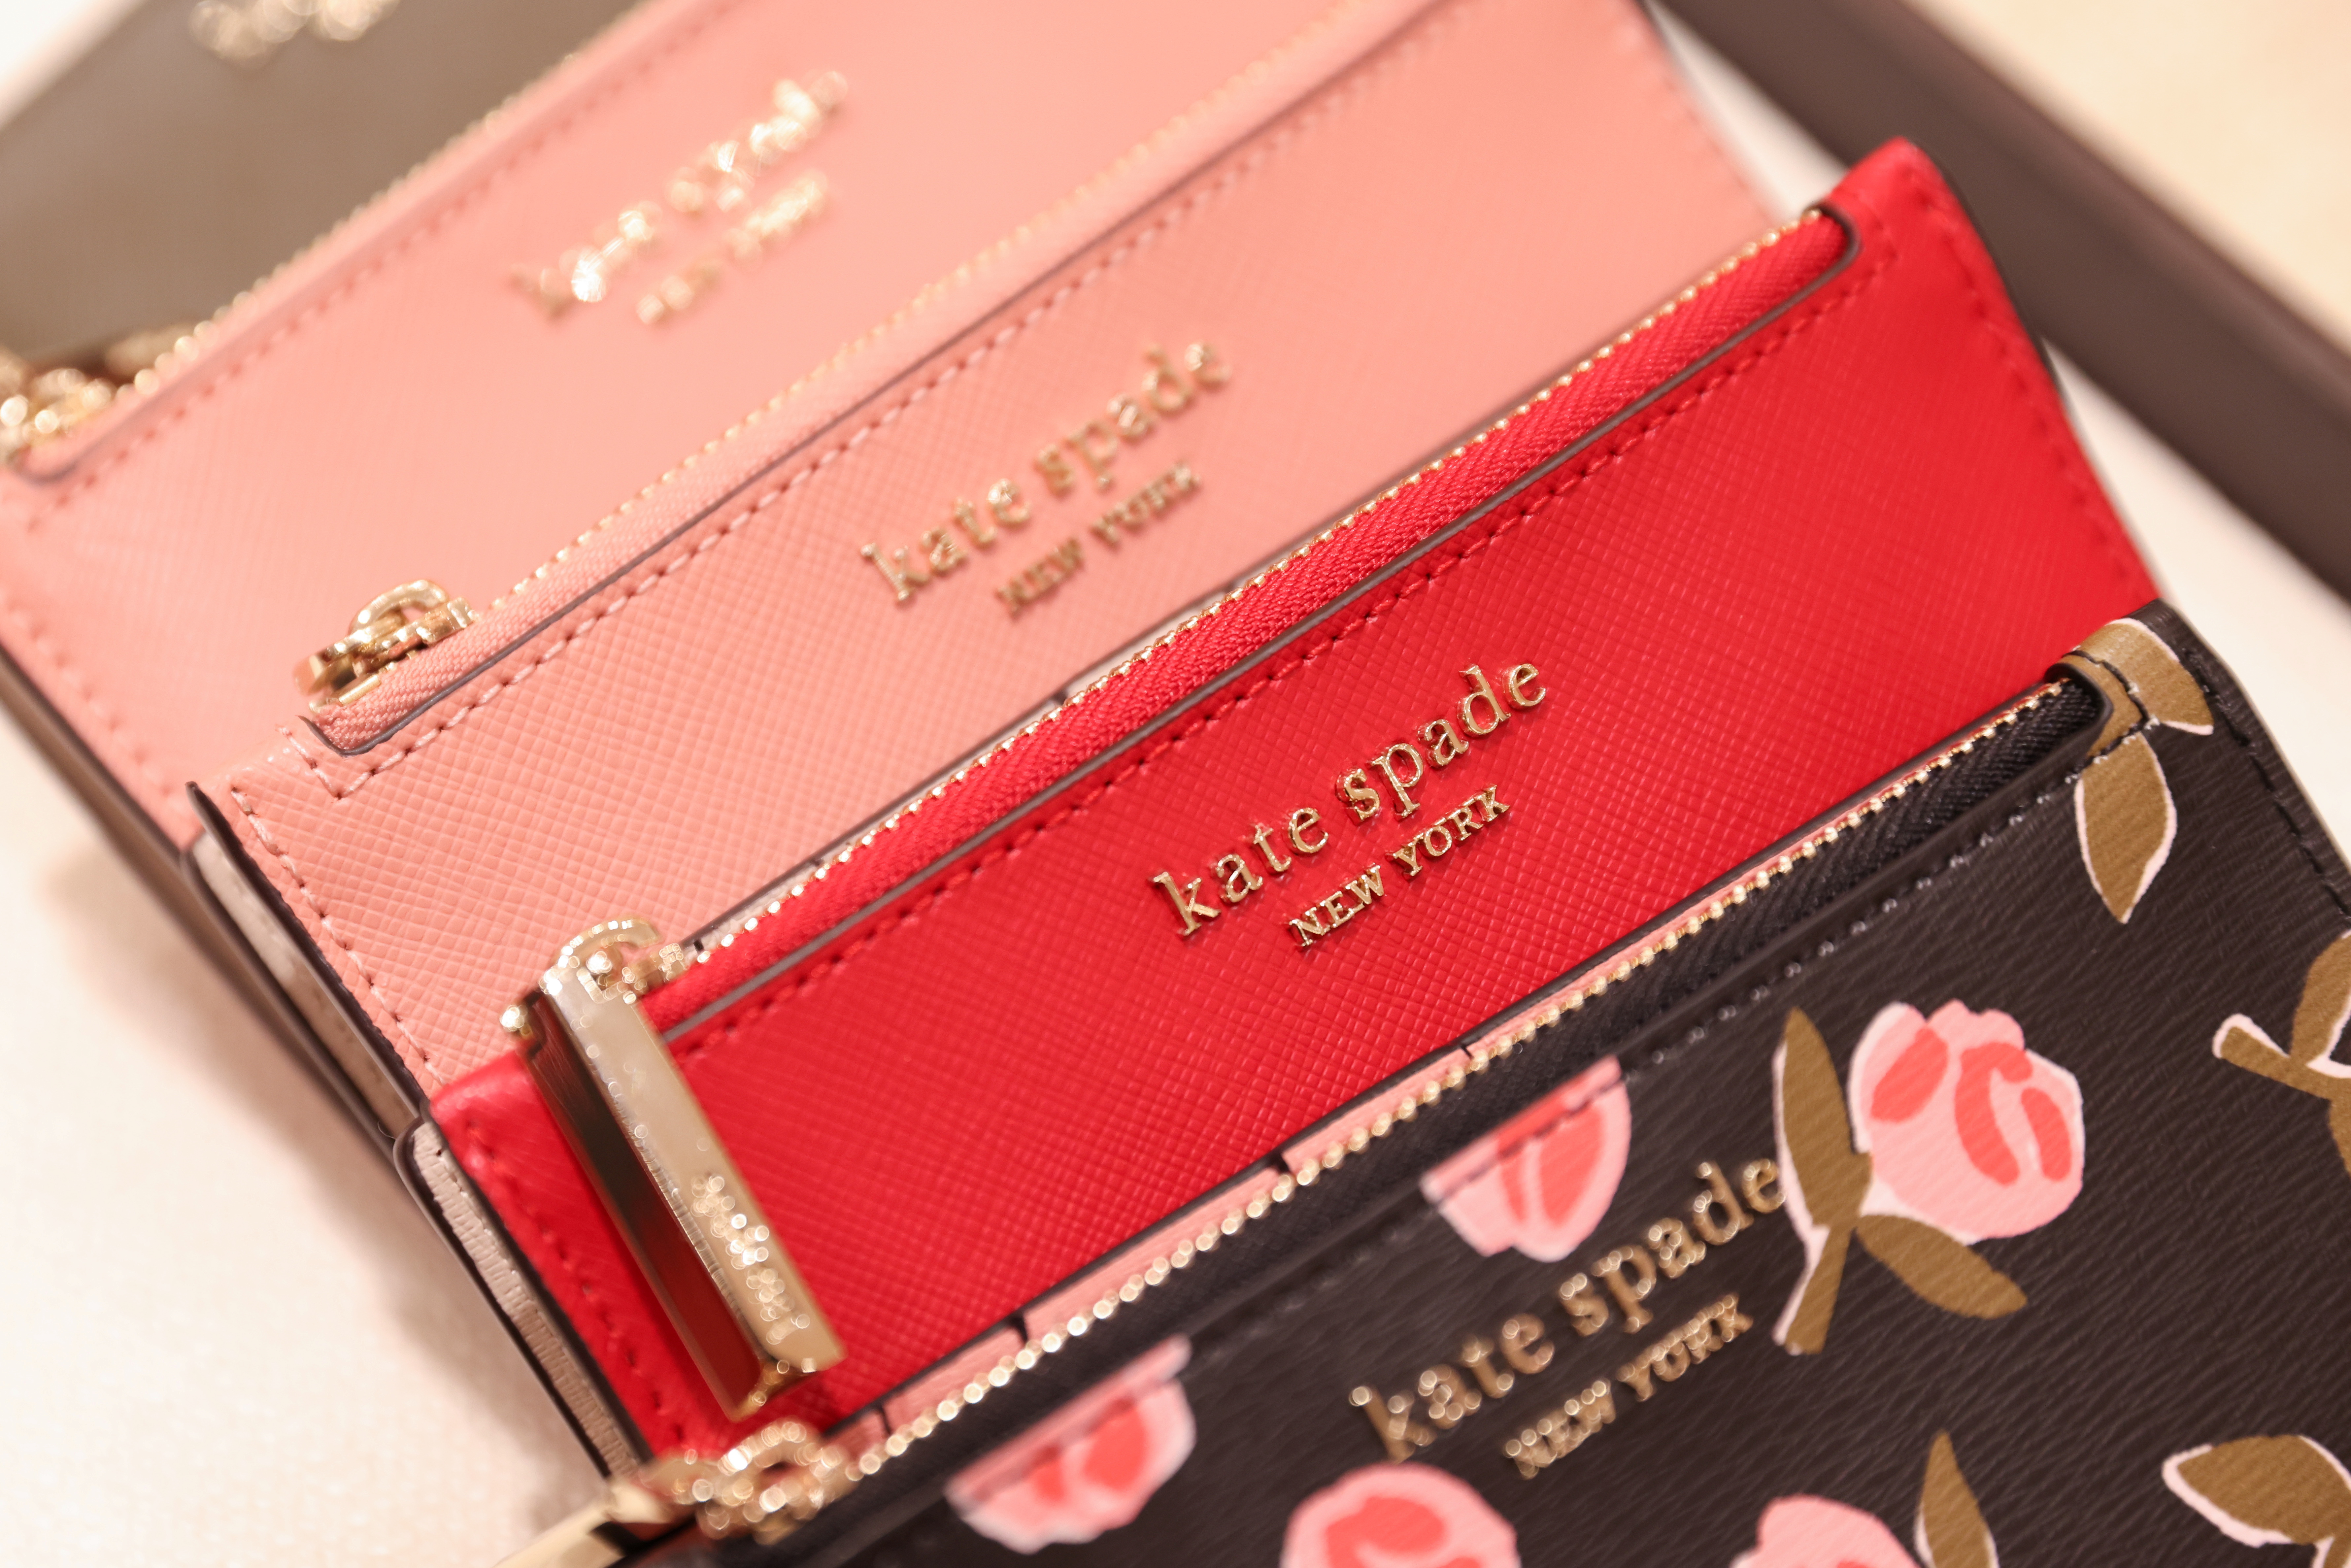 Items are seen in a Kate Spade store, owned by Tapestry, Inc., in Manhattan, New York